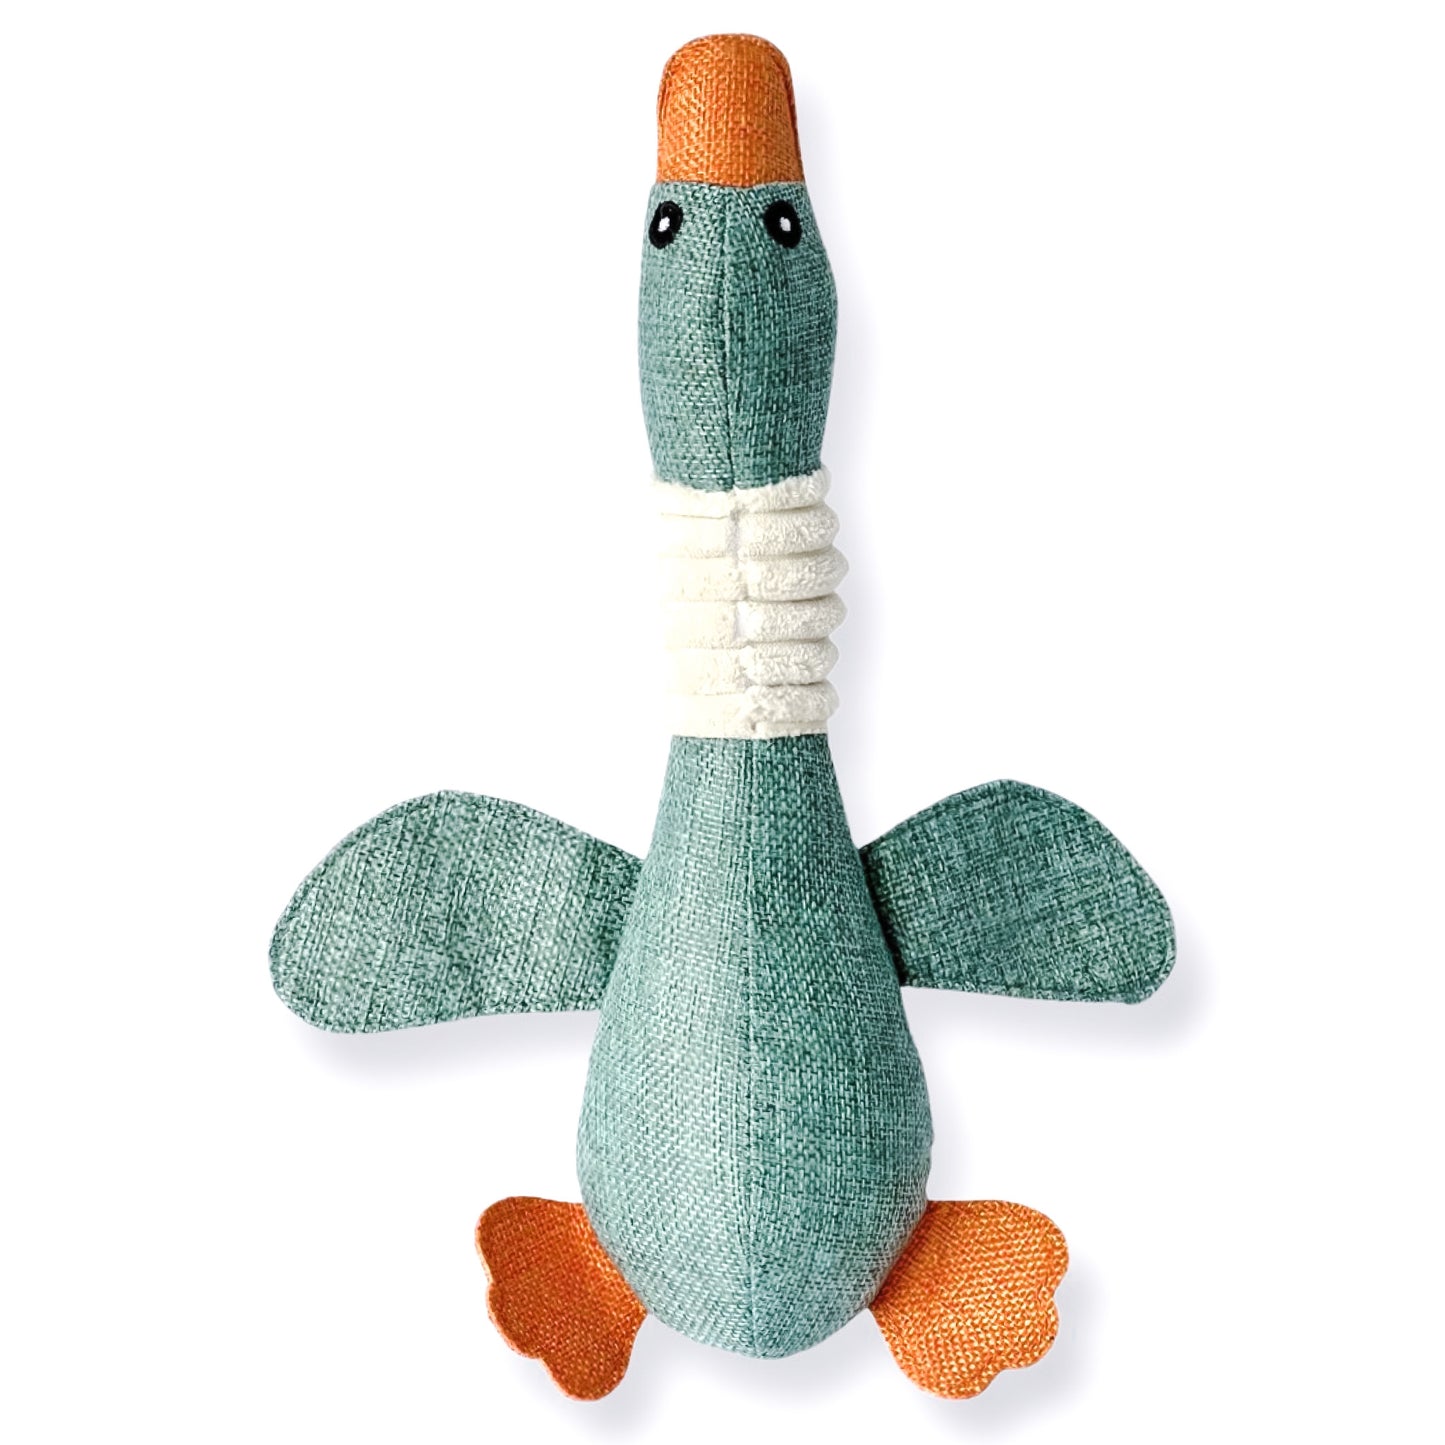 squeaky duck dog toy by Border Loves in Teal colour with orange beak and feet